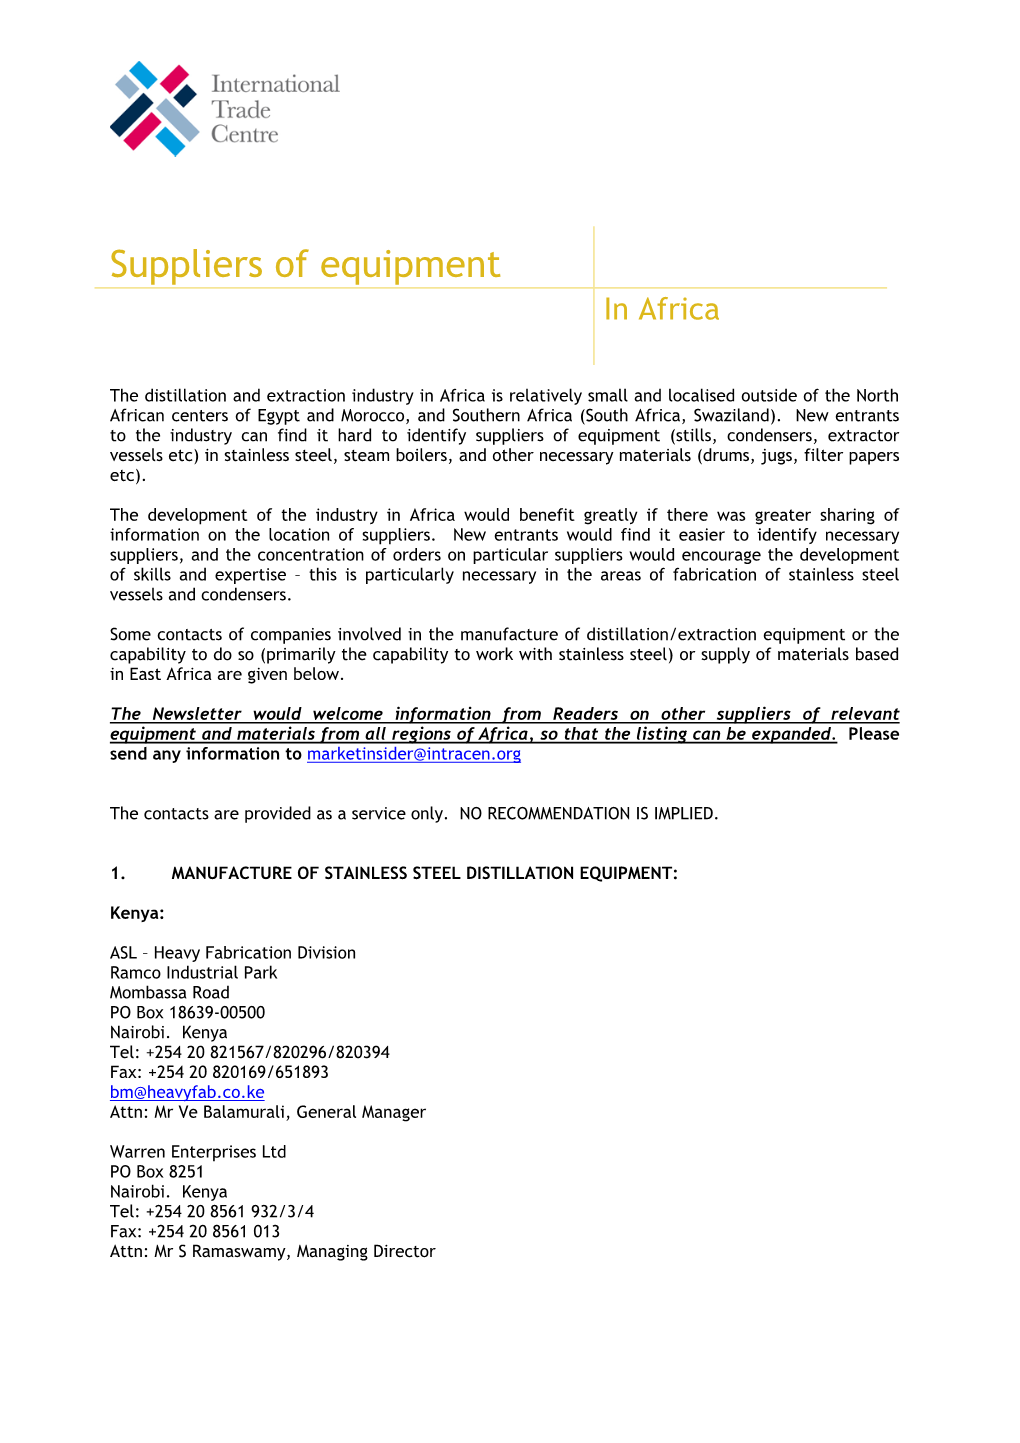 Suppliers of Equipment in Africa